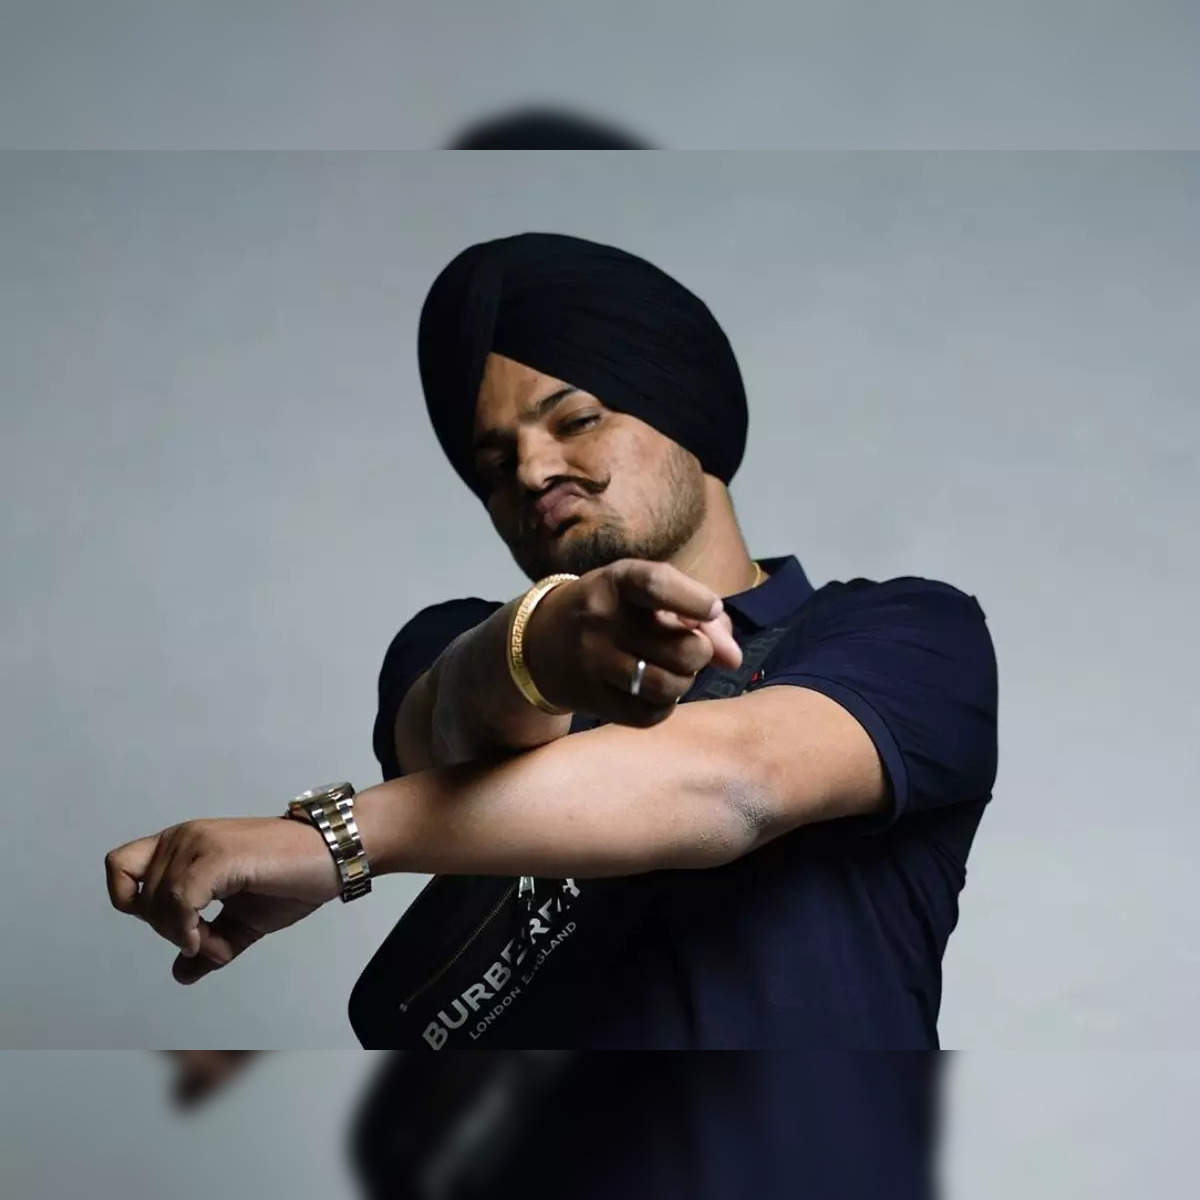 guns lyrics sidhu moose wala was a rebel without a pause his songs stoked controversy for promoting use of weapons violence